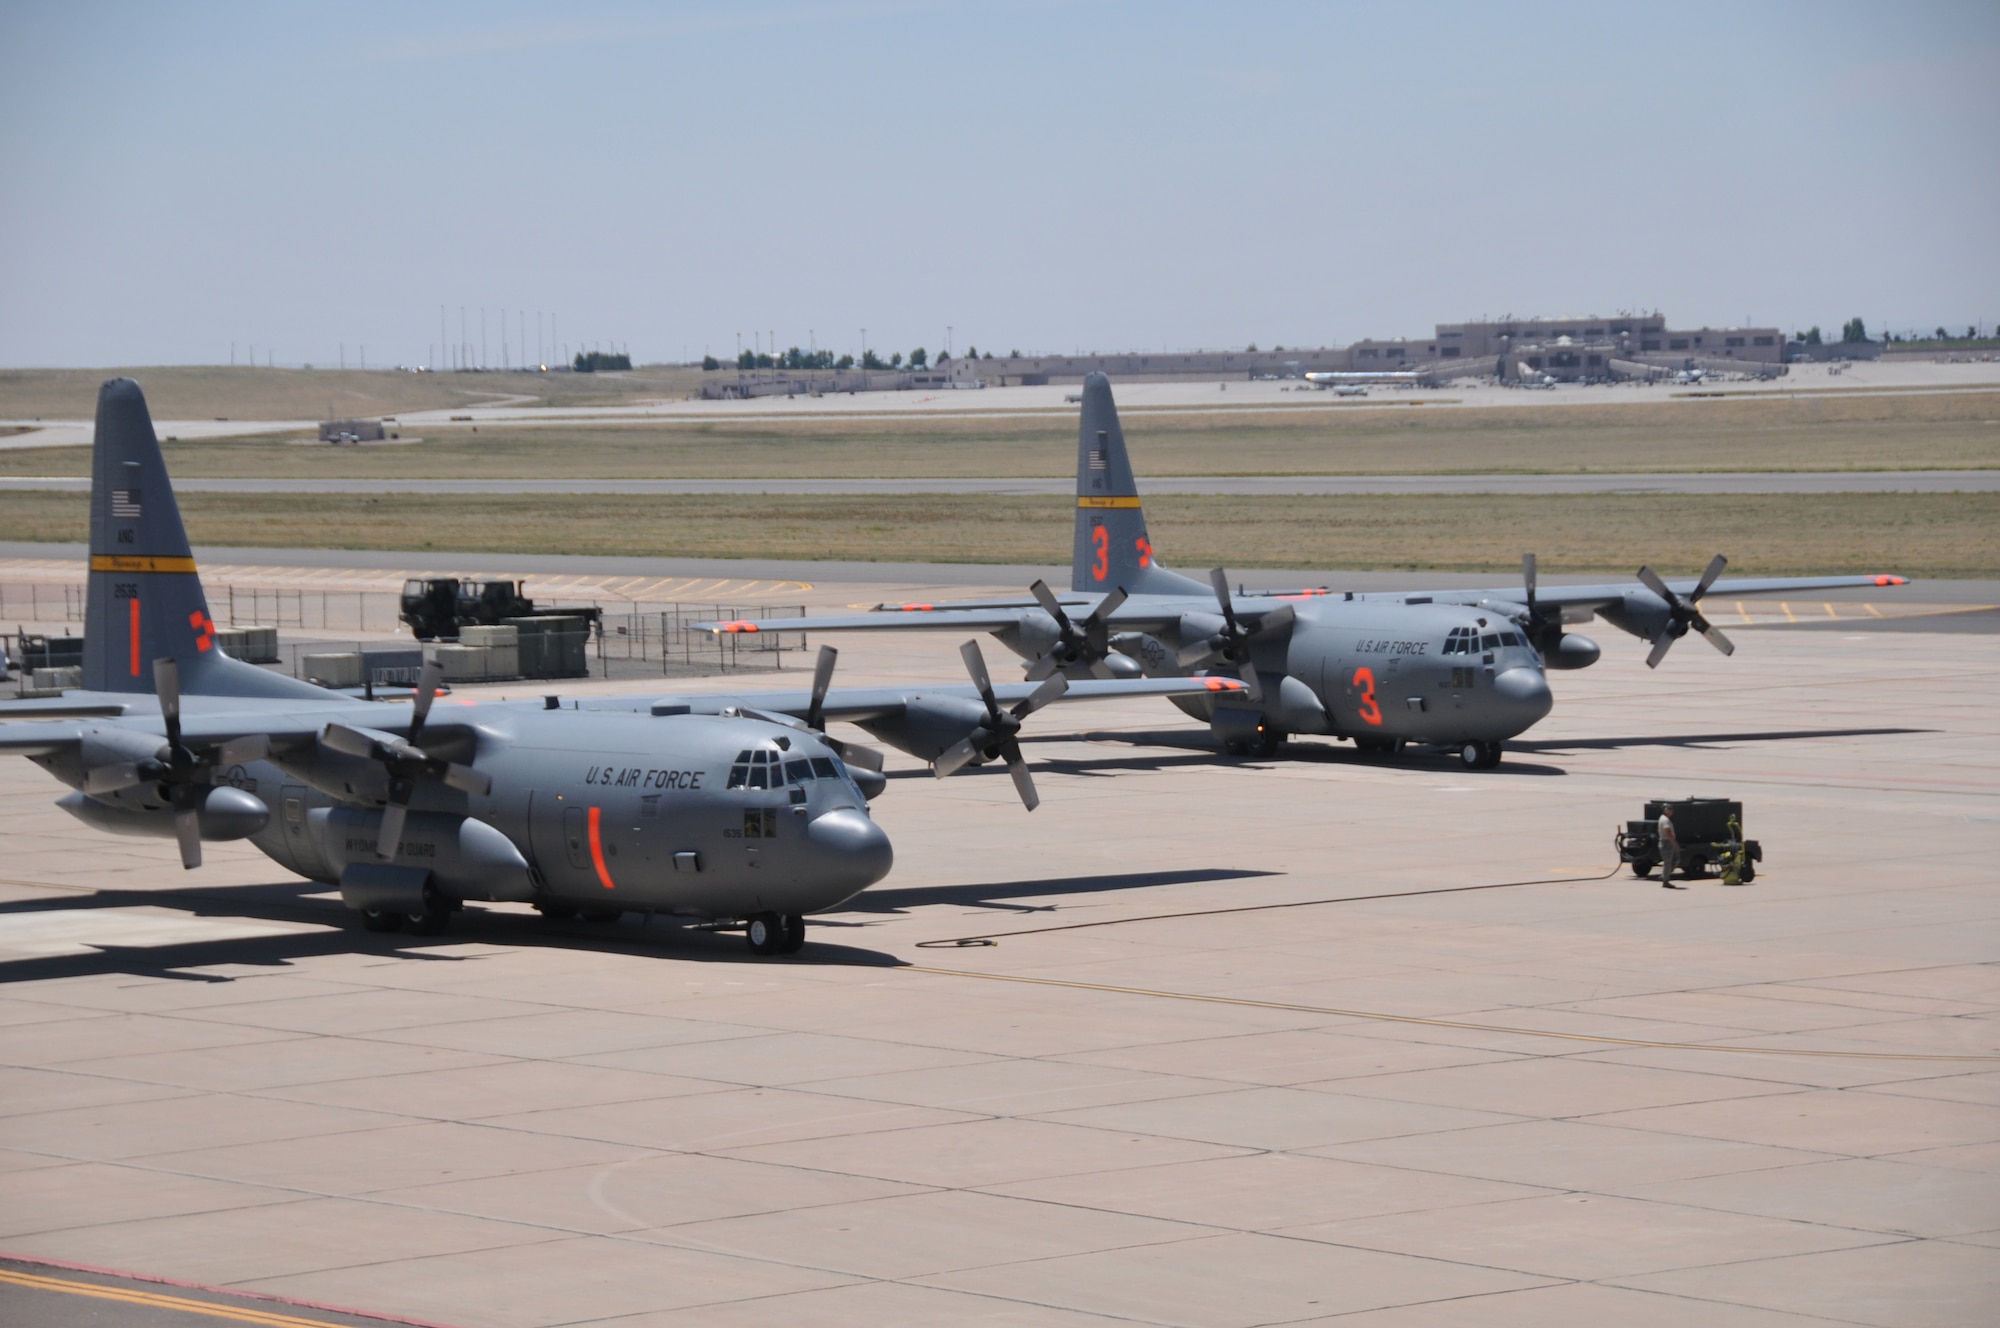 Airmen and MAFFS-equipped C-130s assigned to the 153rd Airlift Wing, Cheyenne, Wyo., arrive at Peterson Air Force Base, Colo., to provide support to ongoing Colorado firefighting efforts. The 153rd Airlift Wing, along with the 302nd Airlift Wing, have been tasked to provide the requested MAFFS support in the state. (U.S. Air Force photo/Airman 1st Class Nichole Grady)